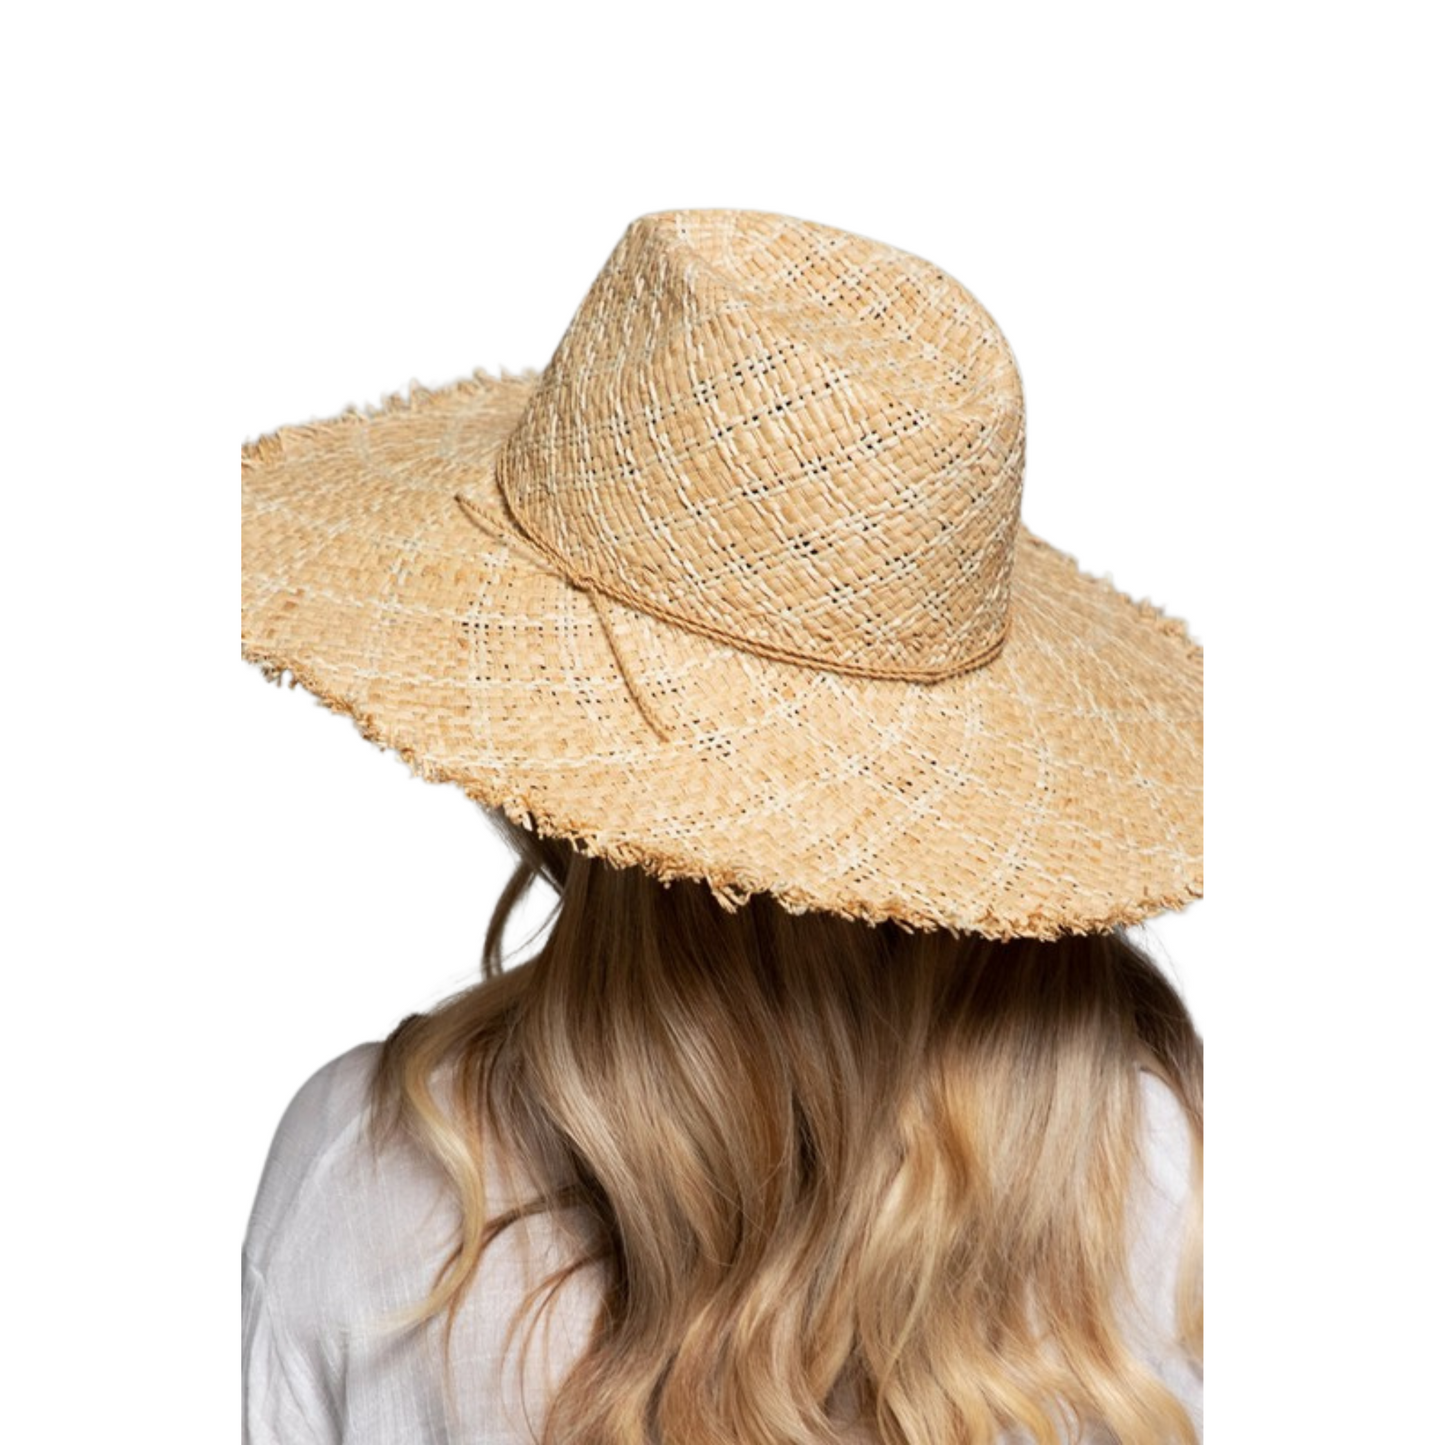 Stay cool and protected from the sun with our Raffia Sun Hat. Crafted with lightweight straw, this stylish hat offers up to 50 UV protection, making sure you stay cool and safe when enjoying a day at the beach.